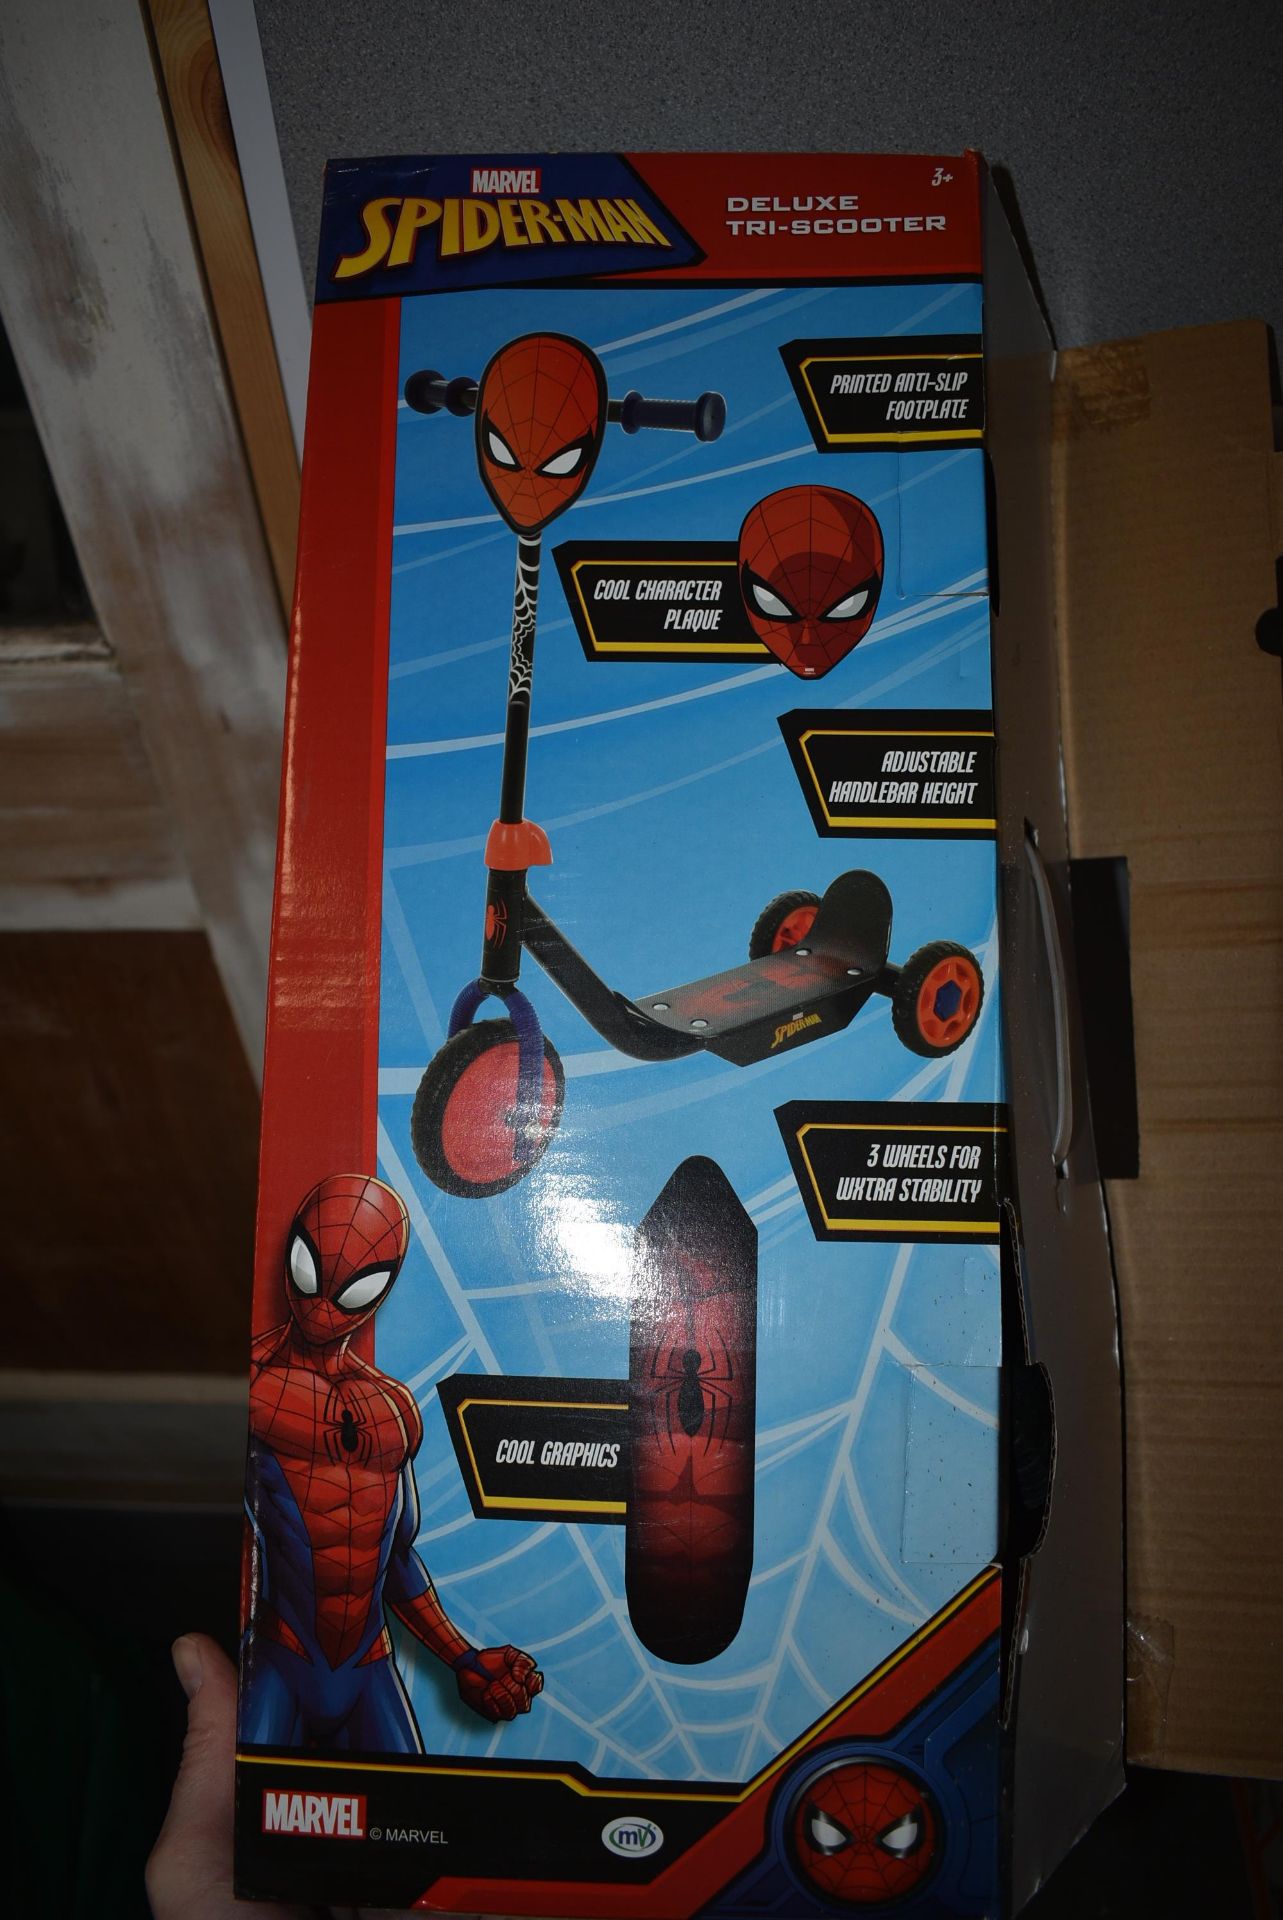 Spiderman Tri-Scooter - Image 3 of 4